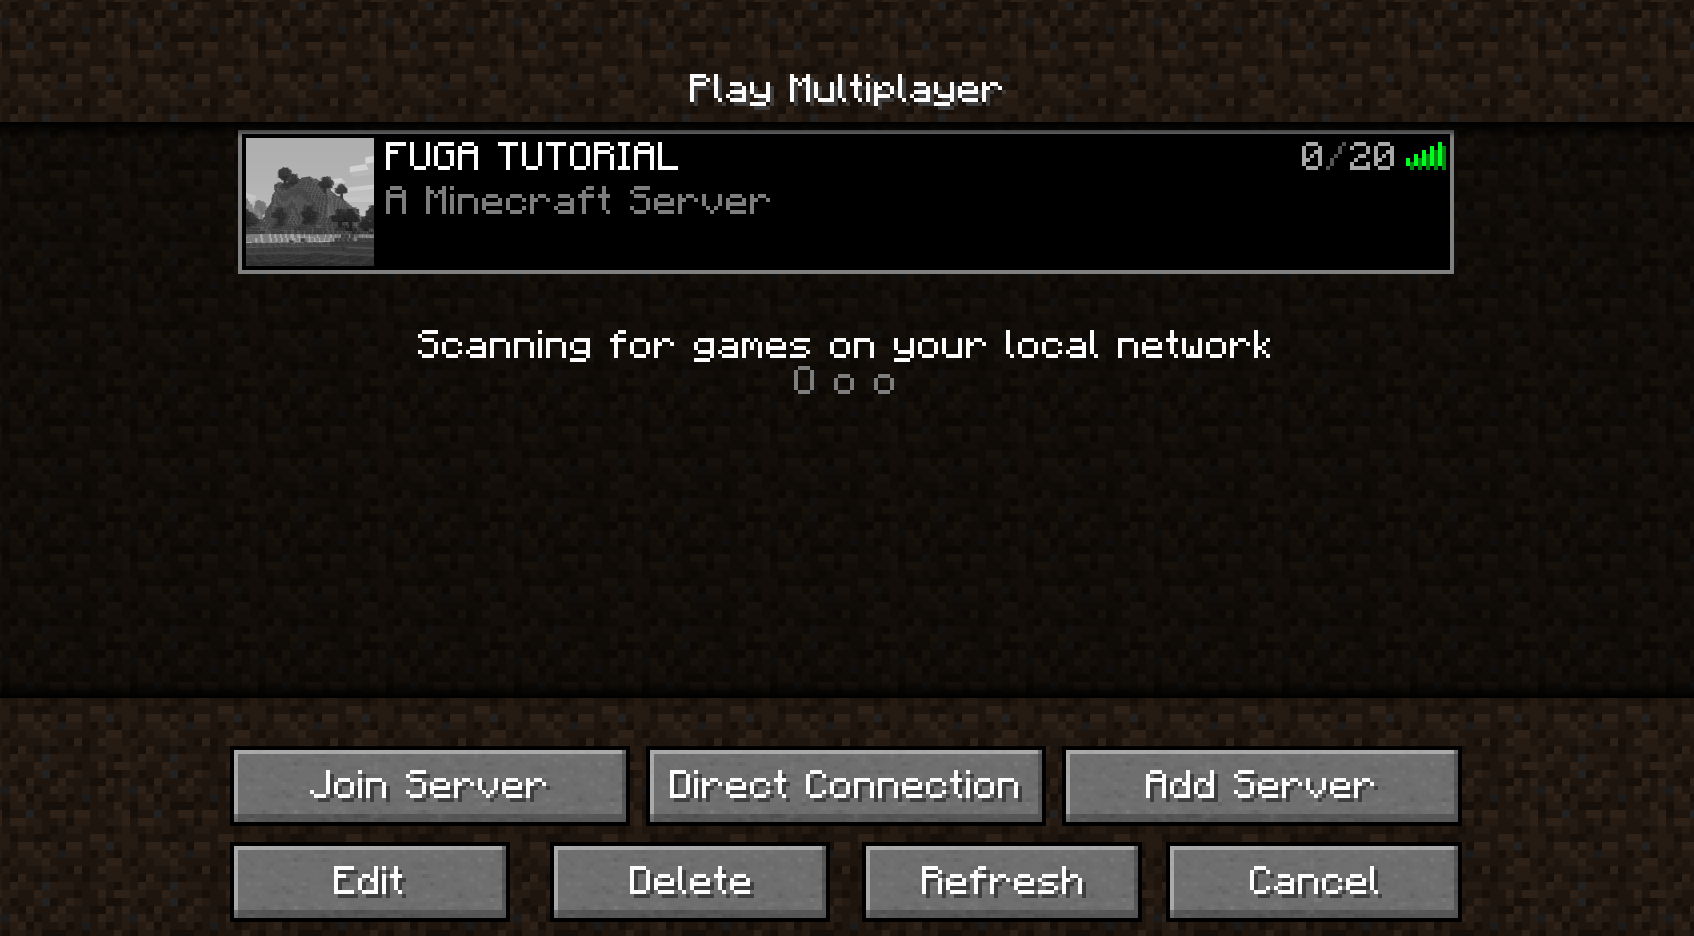 Select the the server you have just created and click on Join Server.